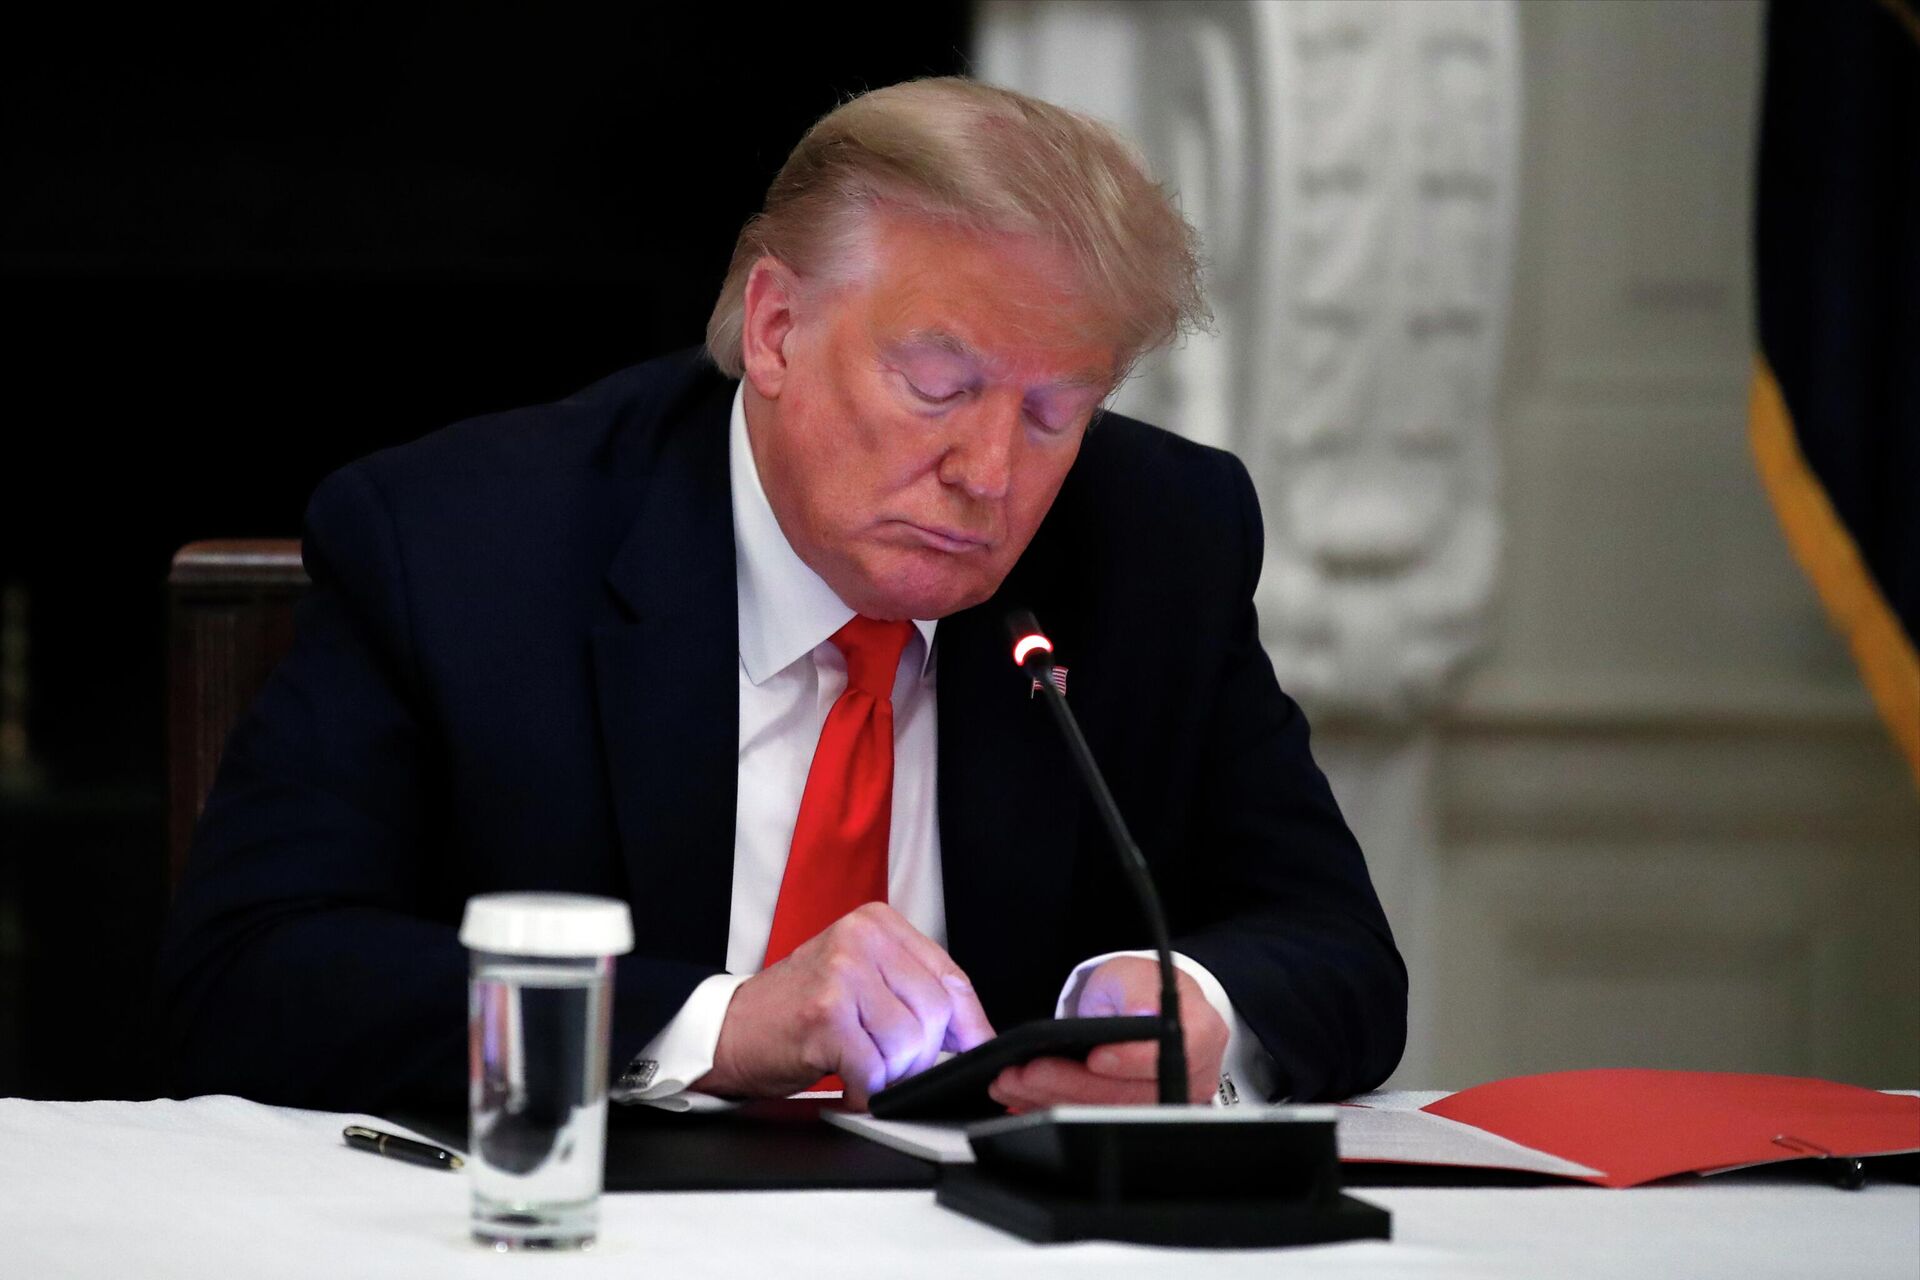 President Donald Trump looks at his phone during a roundtable with governors on the reopening of America's small businesses, in the State Dining Room of the White House in Washington, June 18, 2020 - Sputnik International, 1920, 15.11.2022